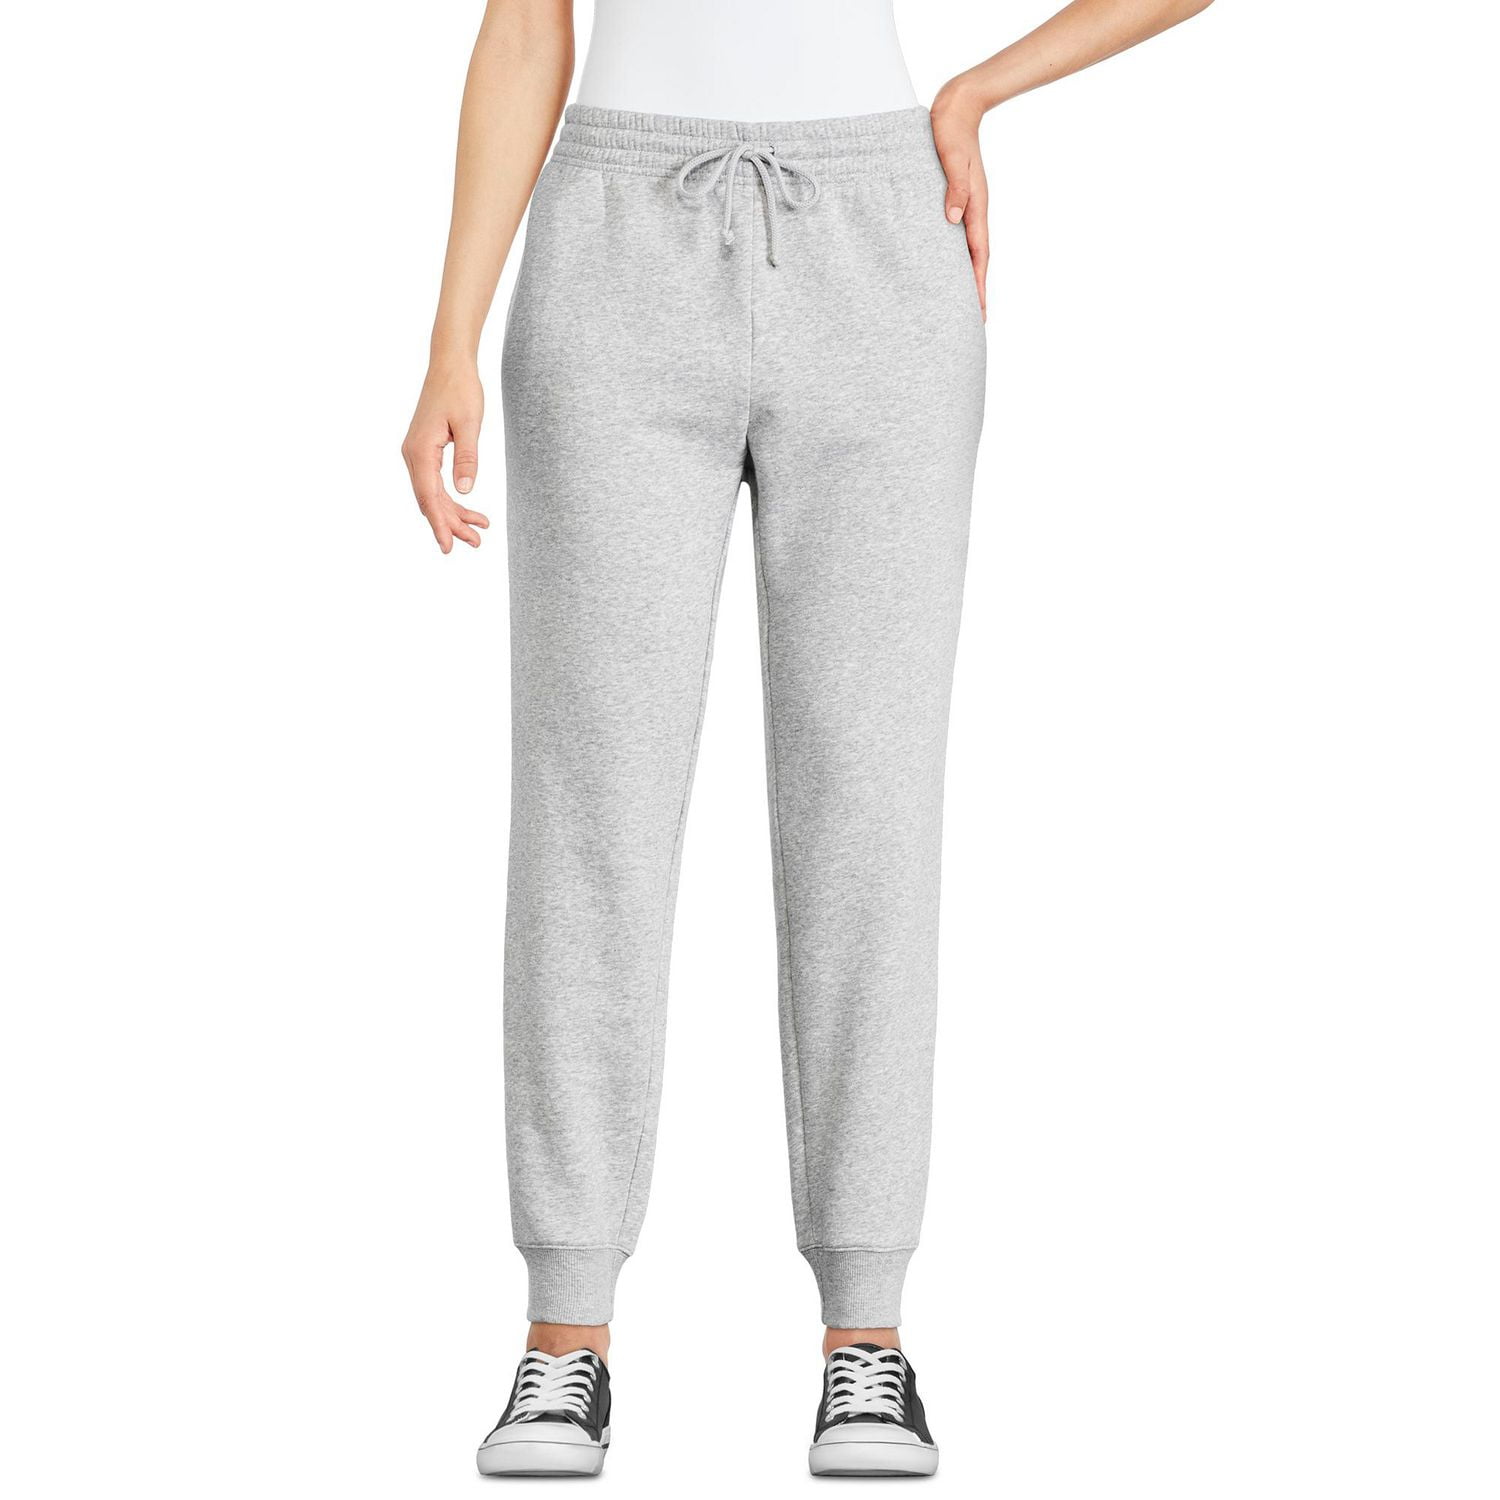 Best joggers for women 2021: Fleeced lined designs for travel and more